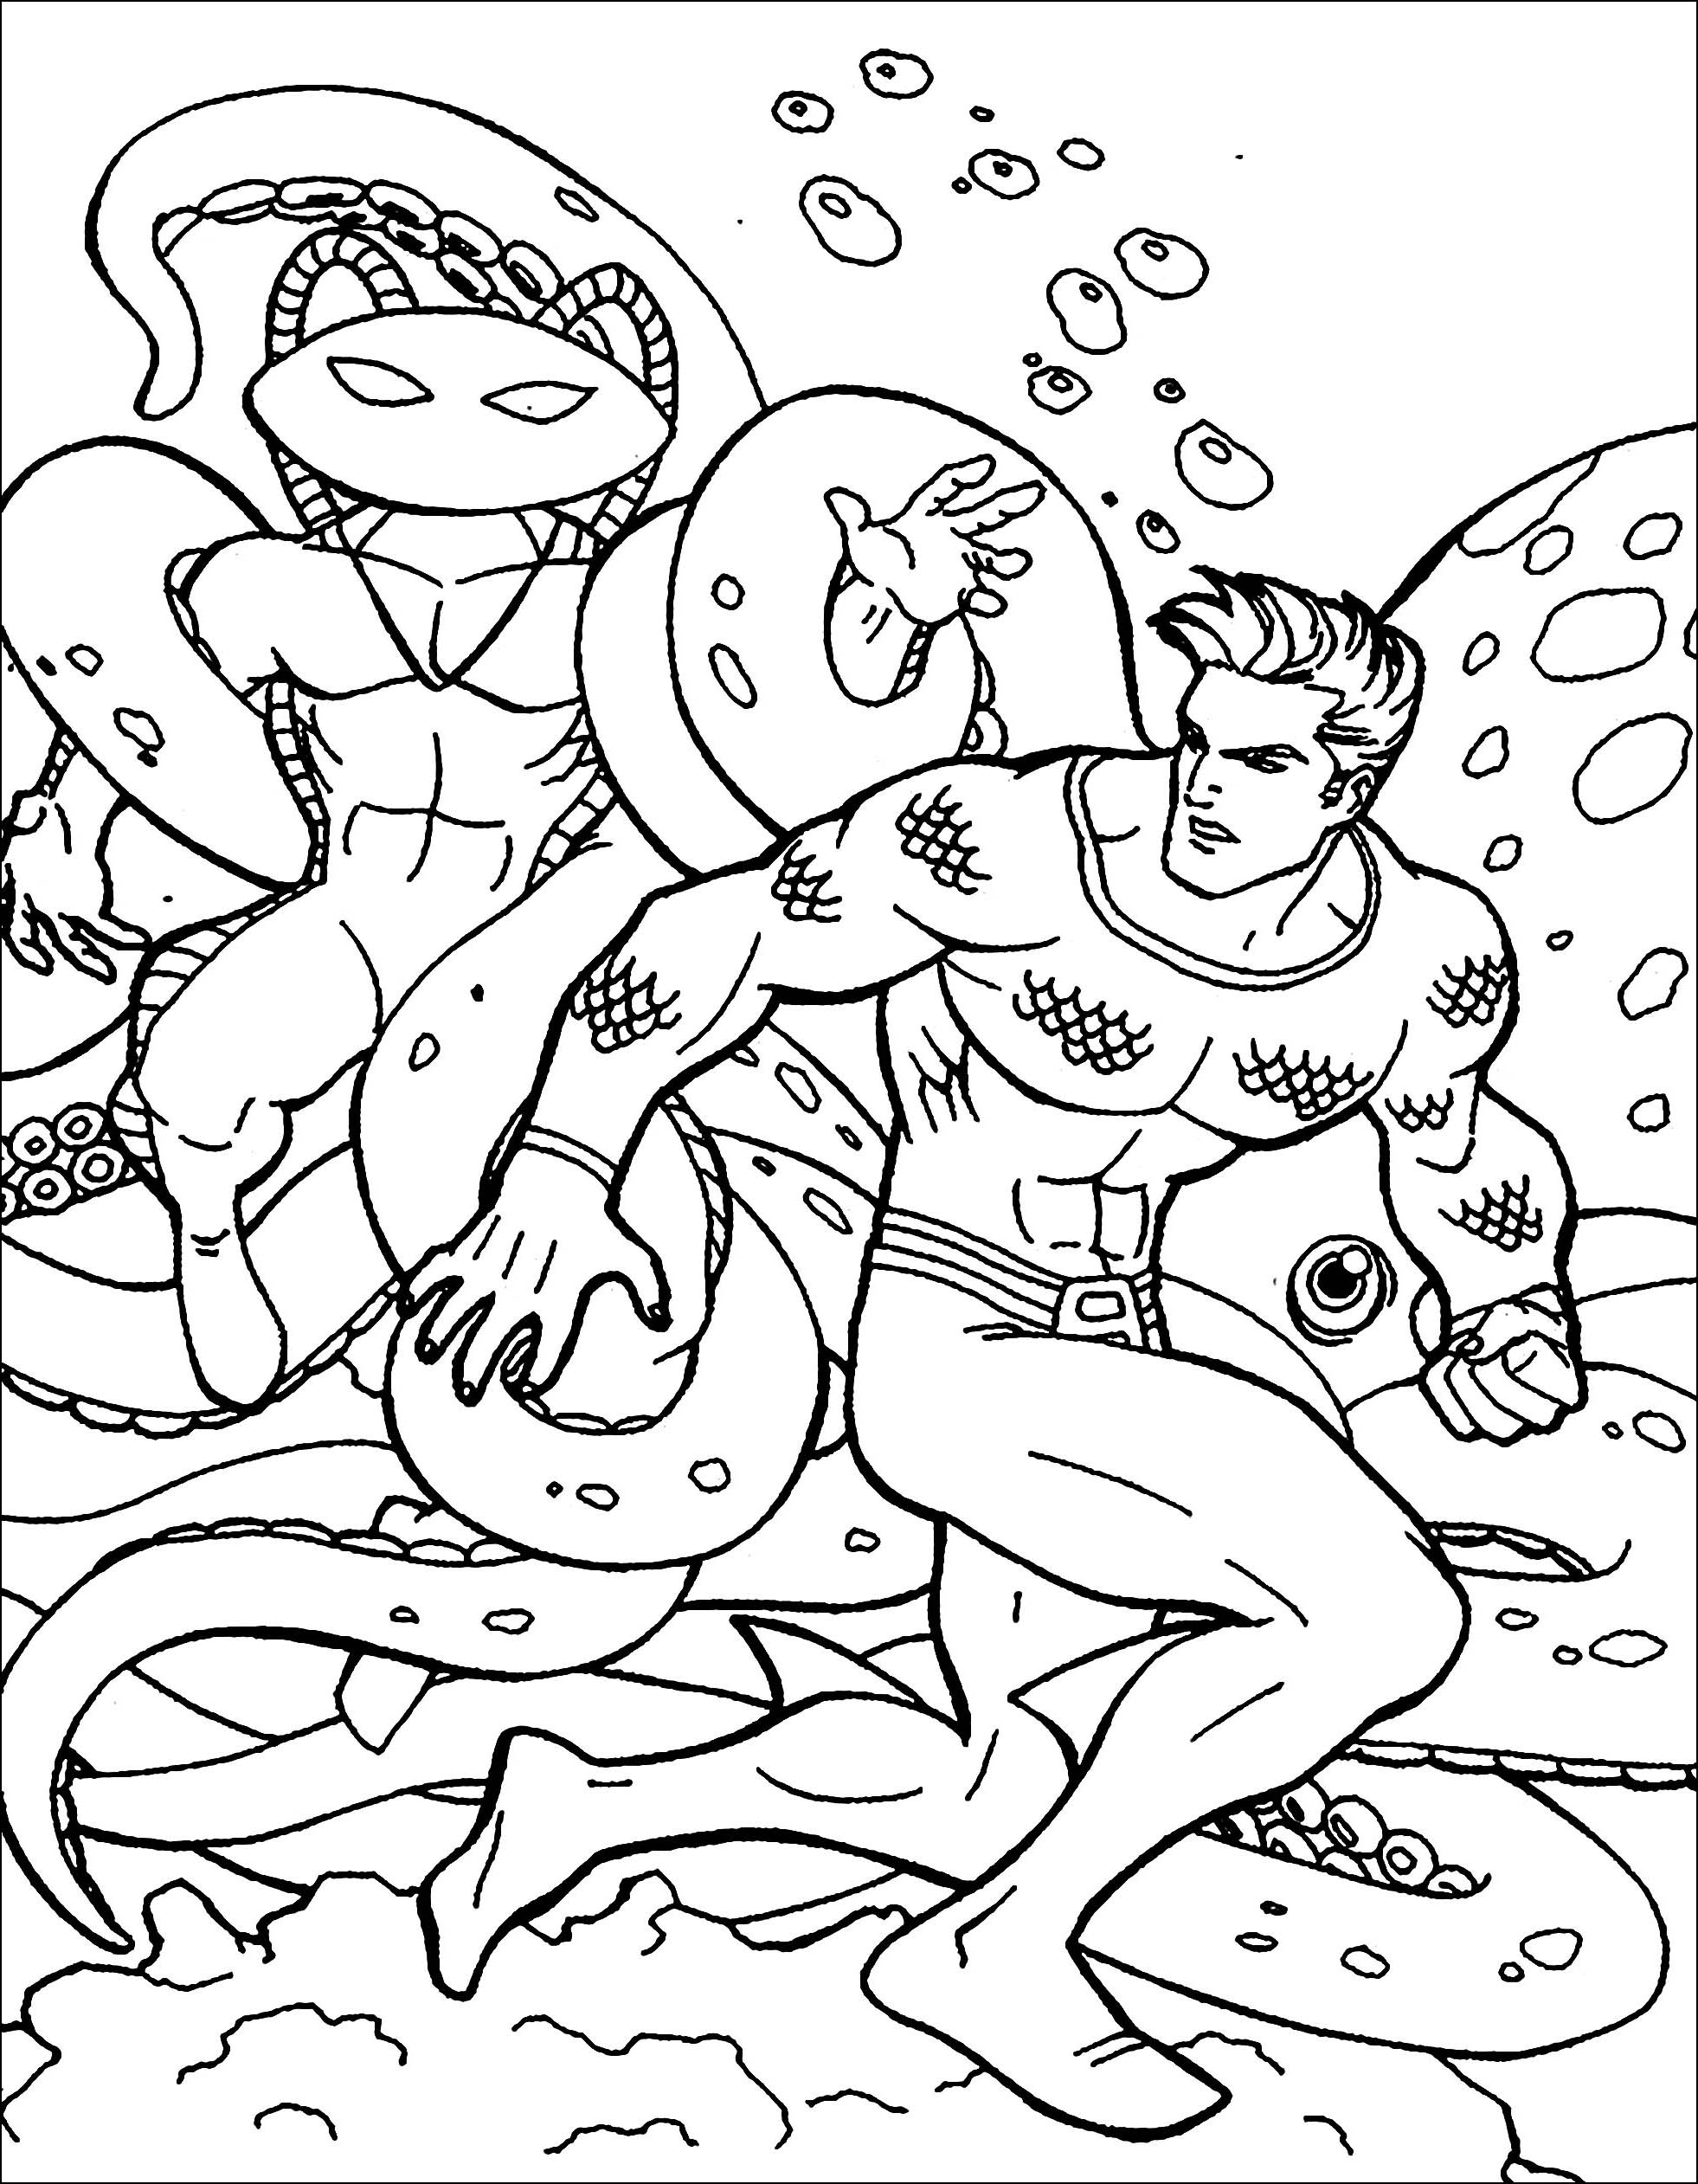 Aquaman Fighting Tentacles Coloring Page